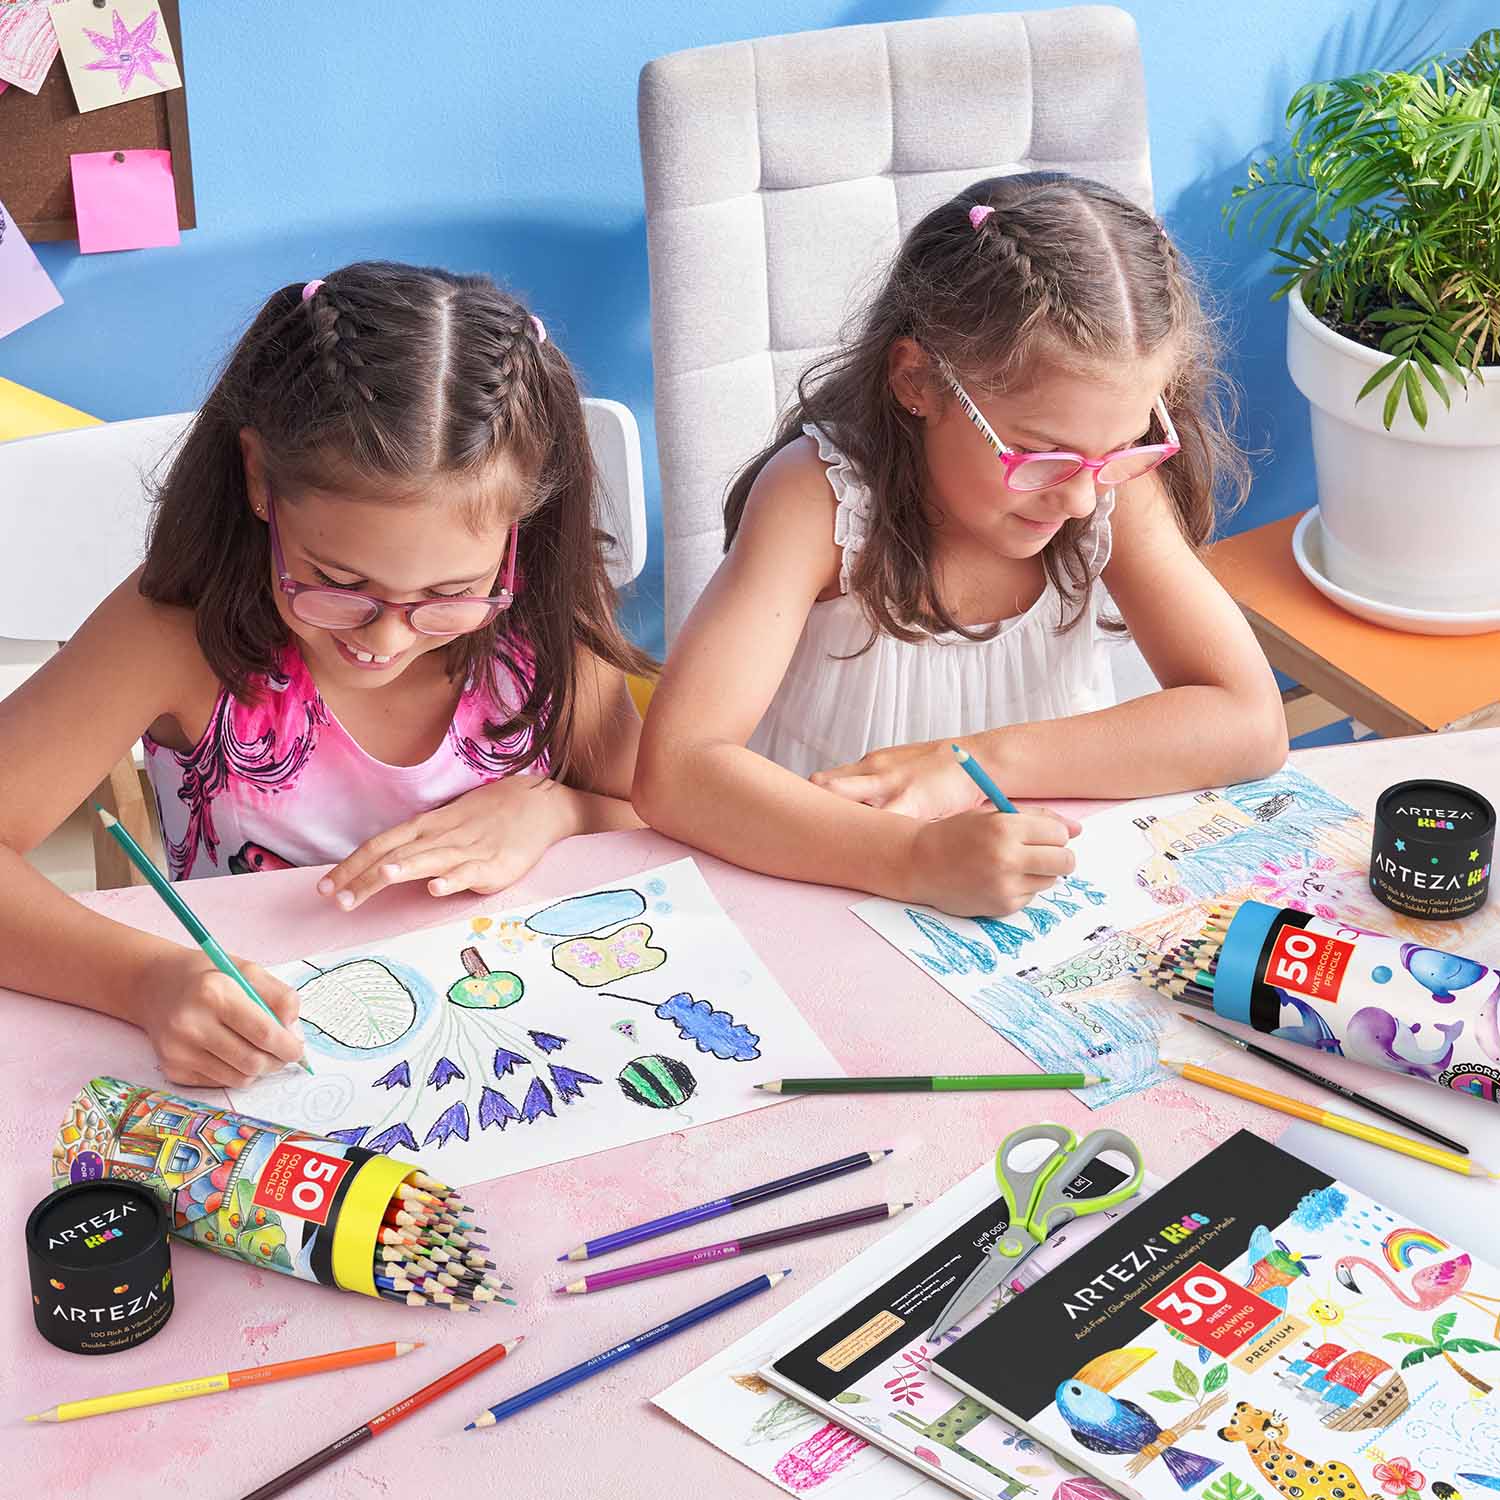  Arteza Kids Fantasy Coloring Kit, 3 Canvas Panels, 4 x 4 in, 10  Markers, 16 Watercolor Pencils, 1 Paint Brush, 1 Sharpener, Kids Activities  for Ages 6 and Up : Everything Else